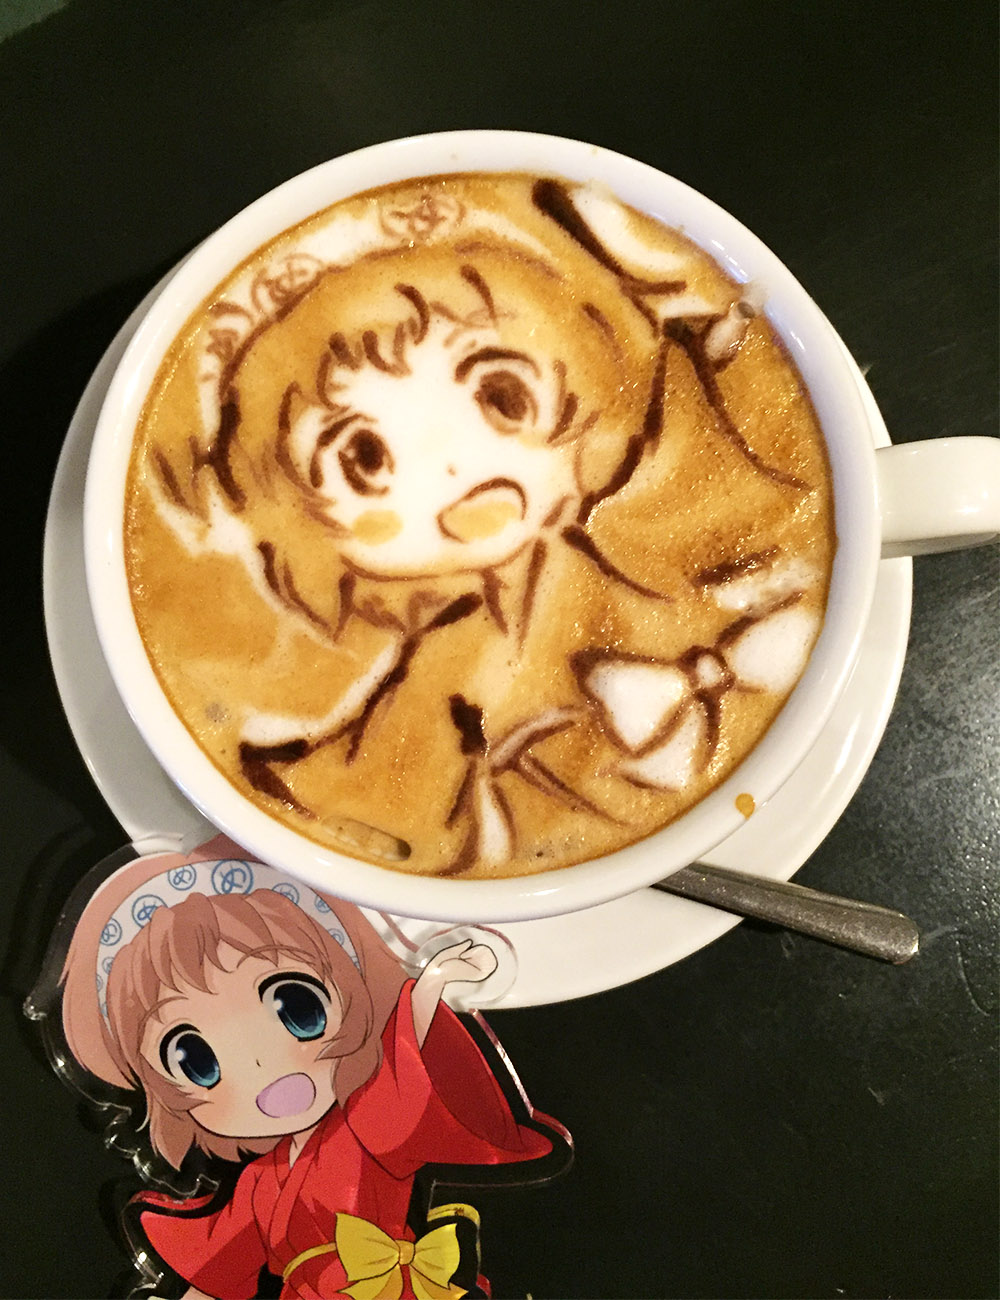 mettoko_image_cafe1